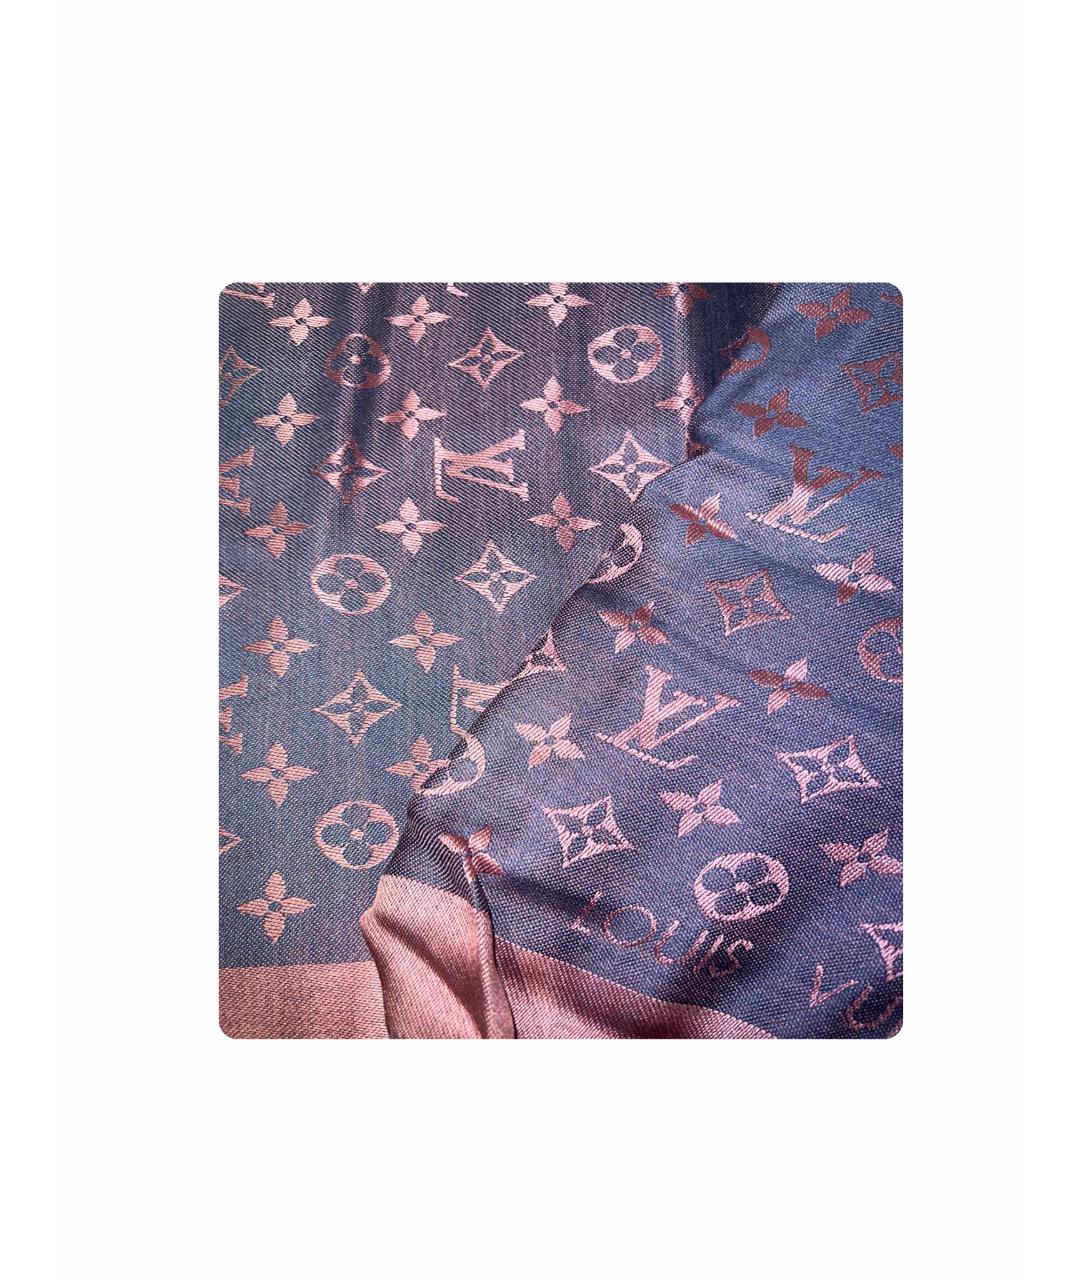 LOUIS VUITTON PRE-OWNED Мульти шелковый платок, фото 1